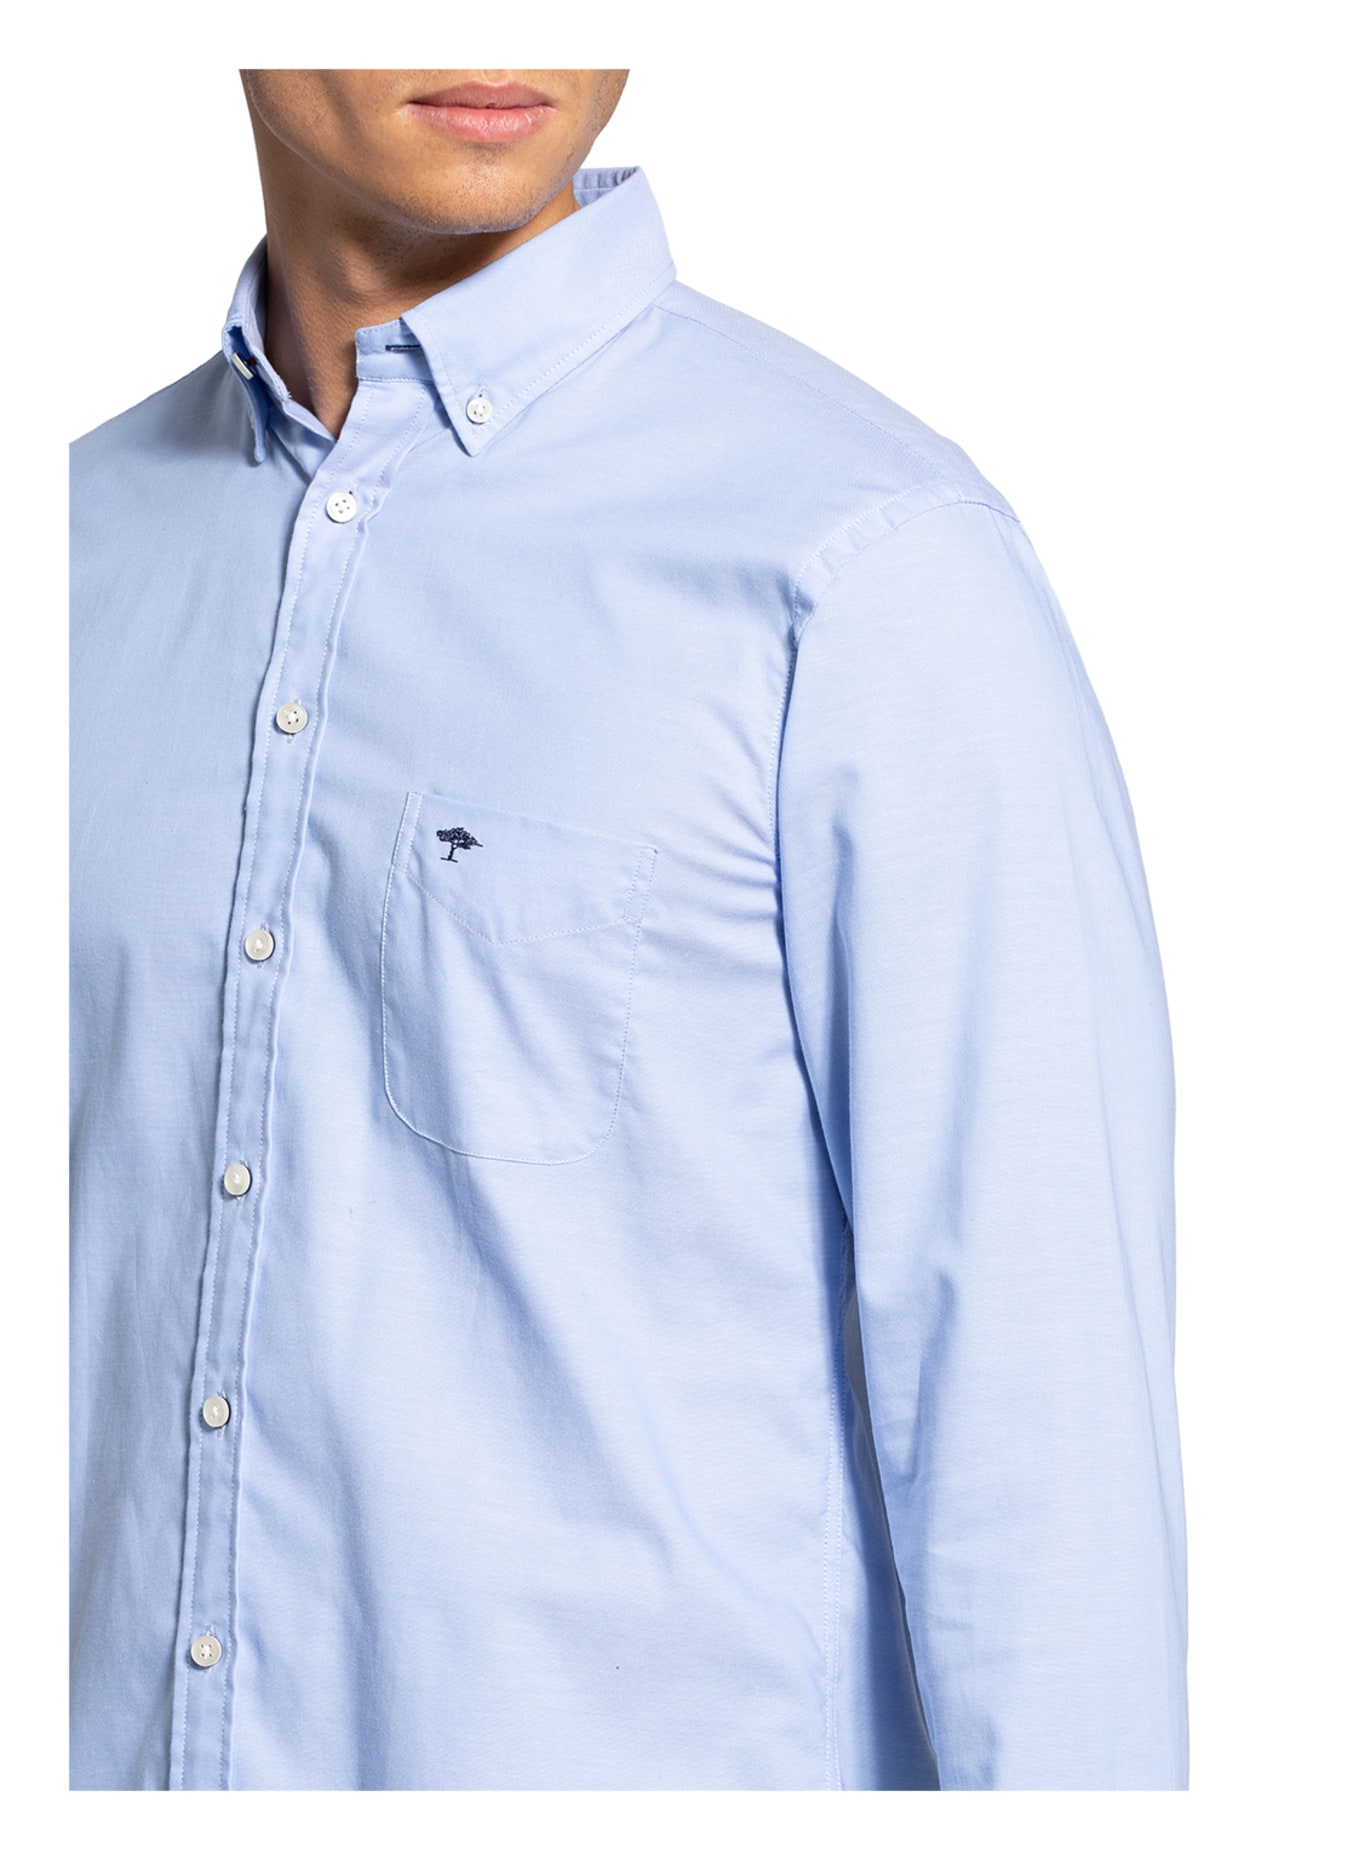 FYNCH-HATTON Shirt in blue casual light fit